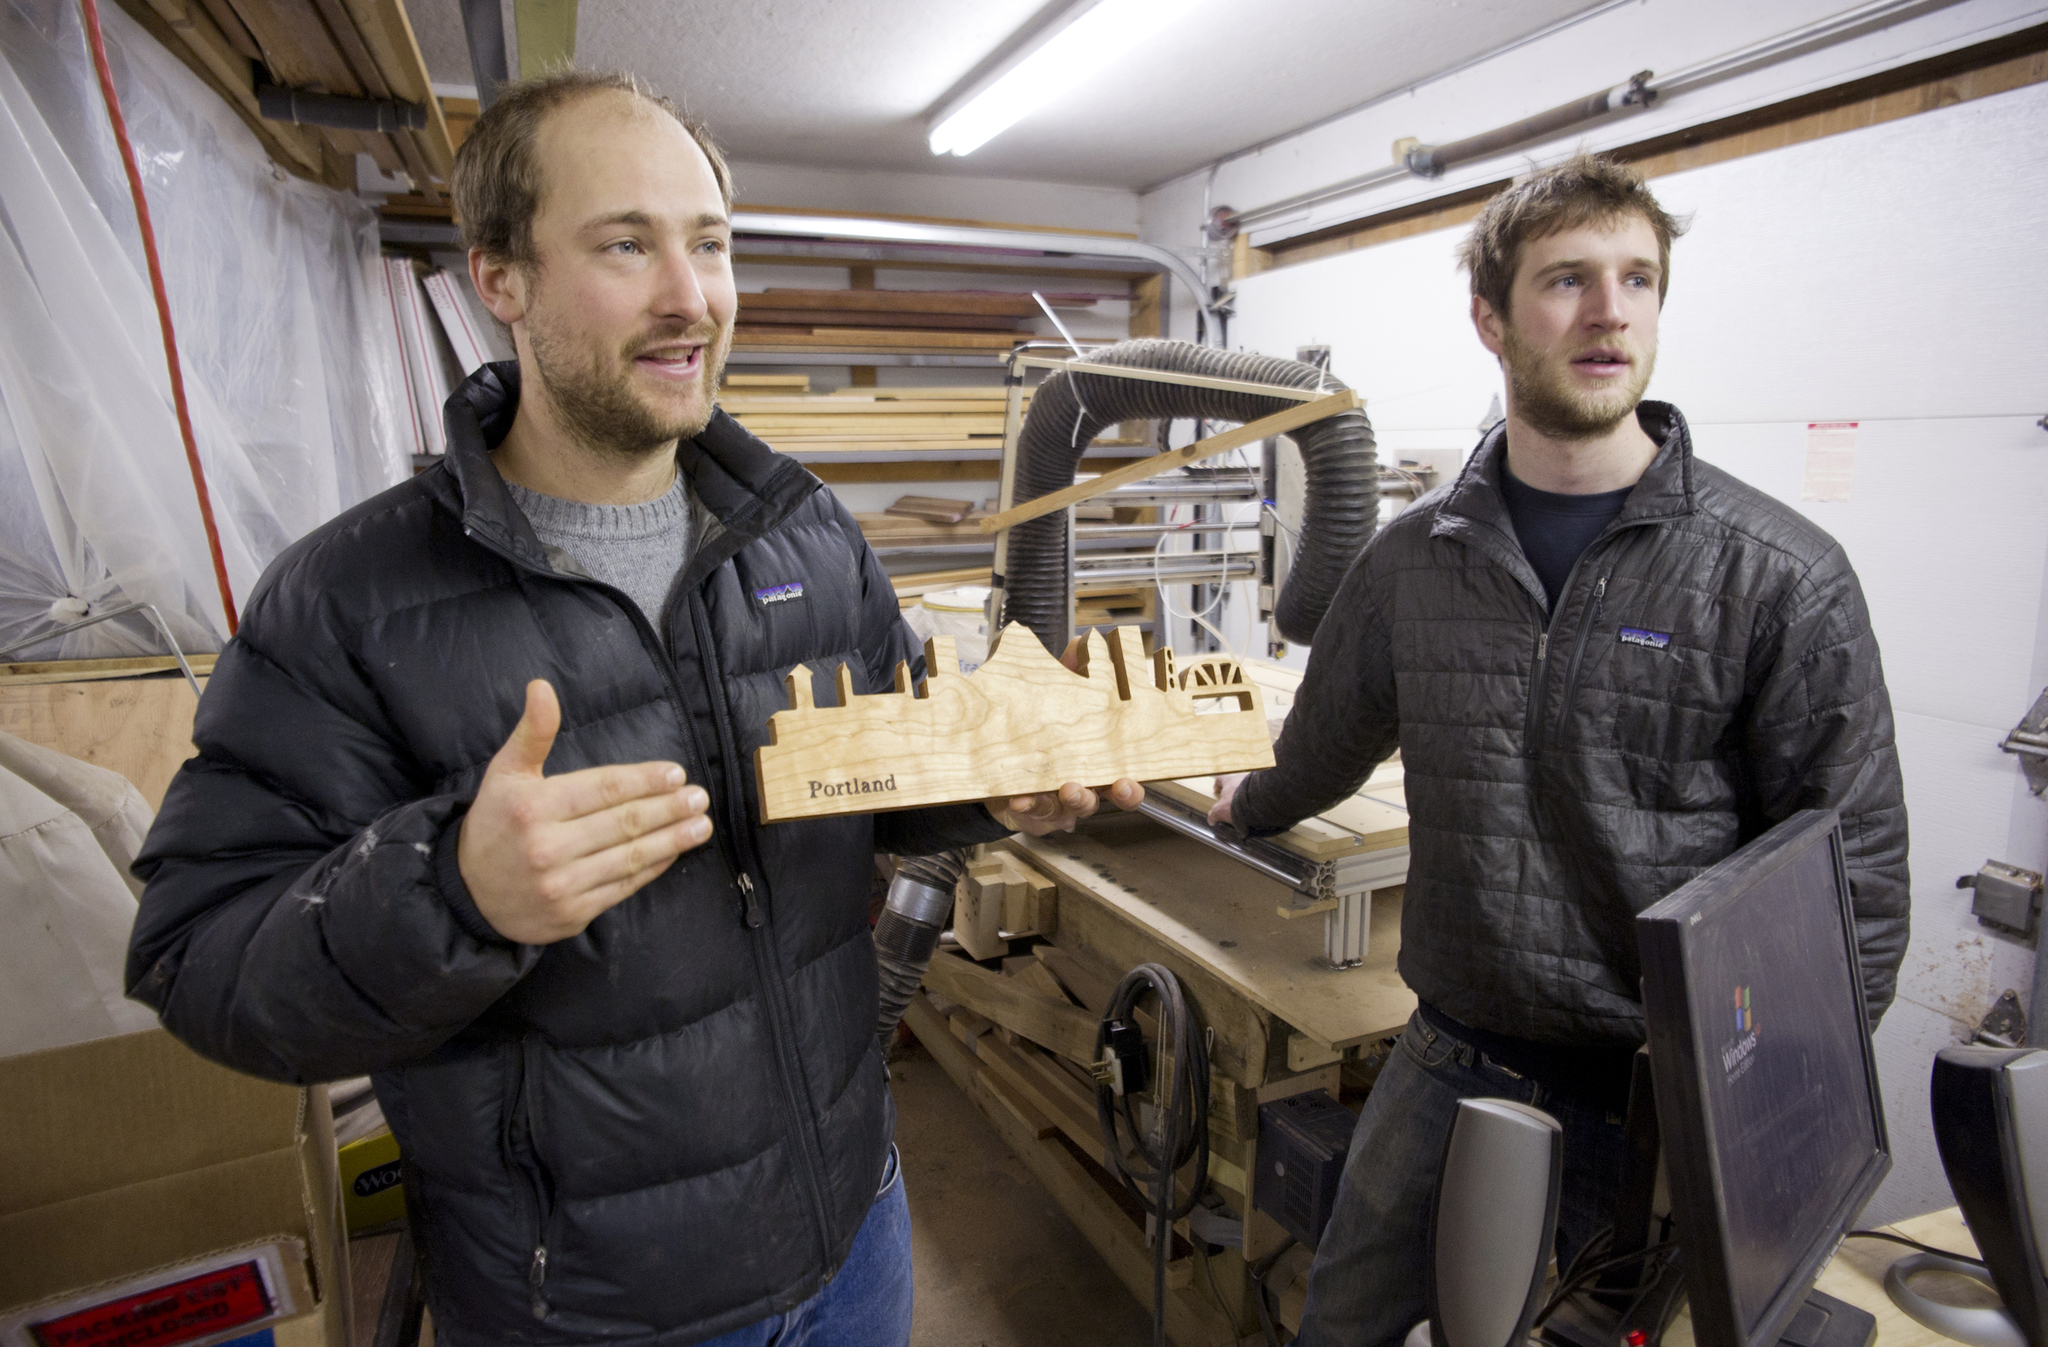 Local woodworkers Max Stanley and Chris Hinkley, of Latitude Woodwares, in their Auke Bay shop on Thursday. The craftsmen, known for wood topographical maps of Southeast, launched a crowdsourcing campaign this week in an attempt to expand their business to national markets. The pair have developed what they call “skyline hangs” — magnetic knife hangers shaped into cityscapes — they hope will sell big in major metropolitan areas. (Michael Penn | Juneau Empire)